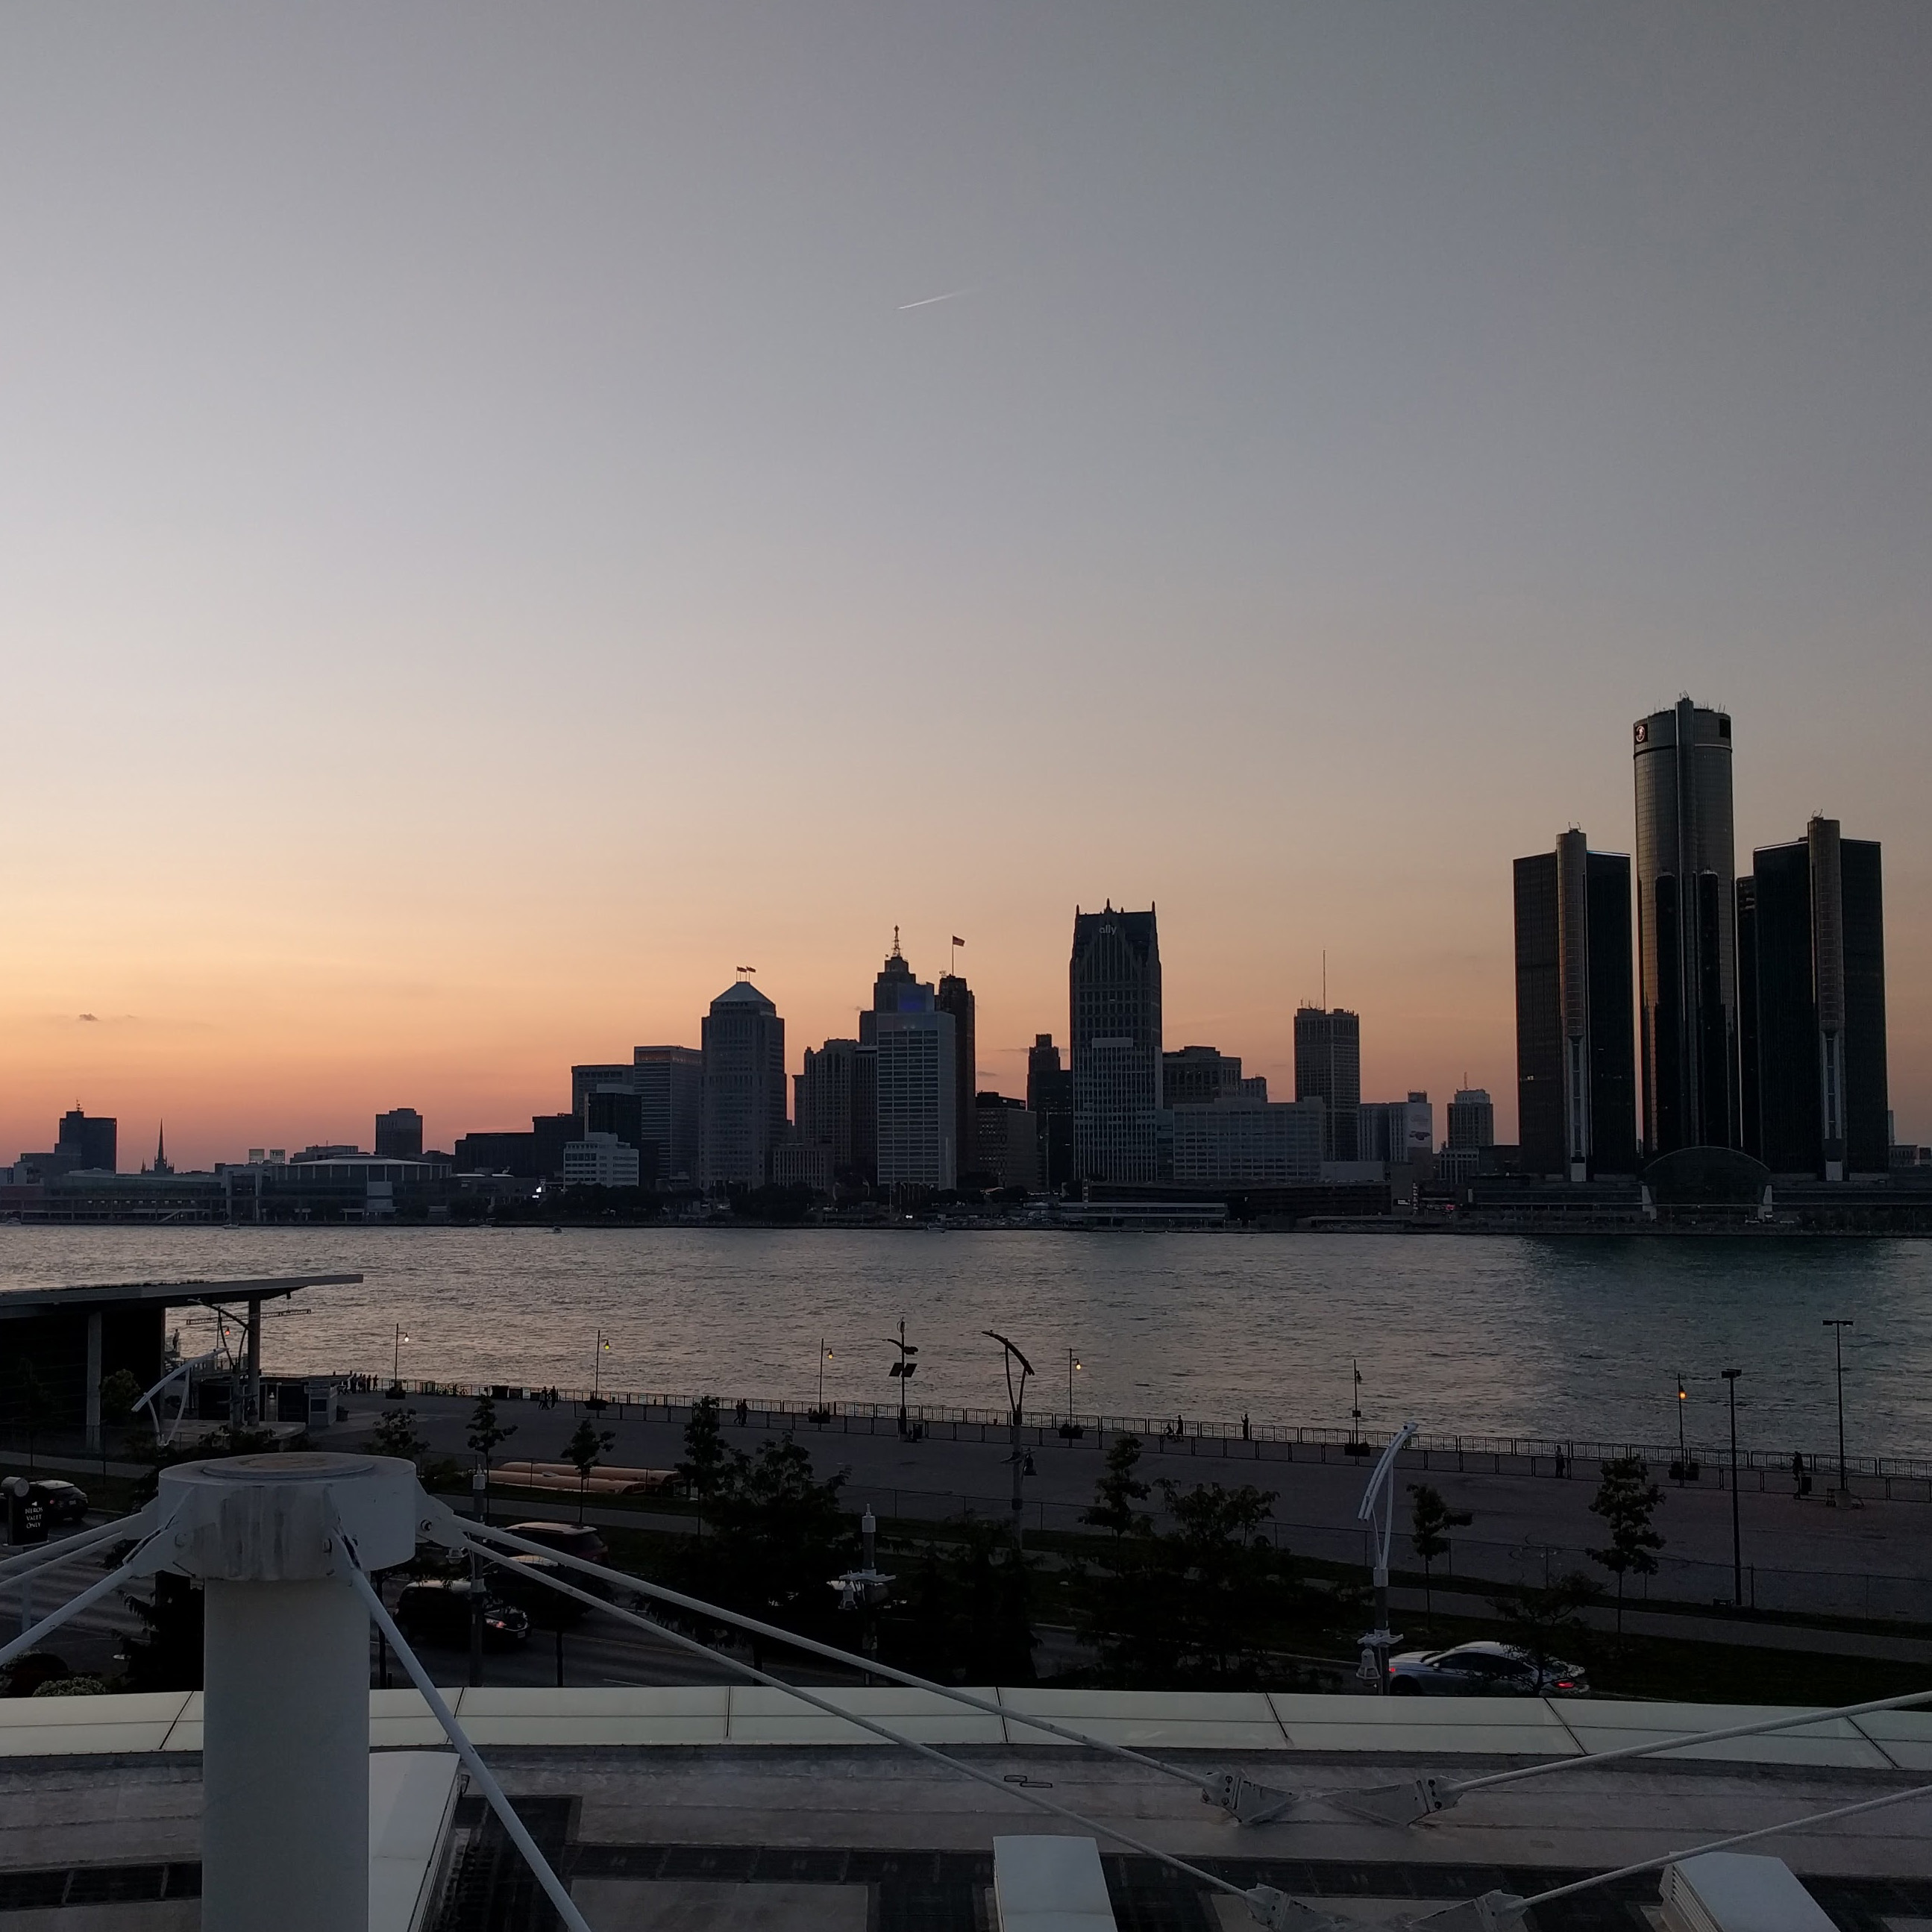 The best view of the Detroit skyline.